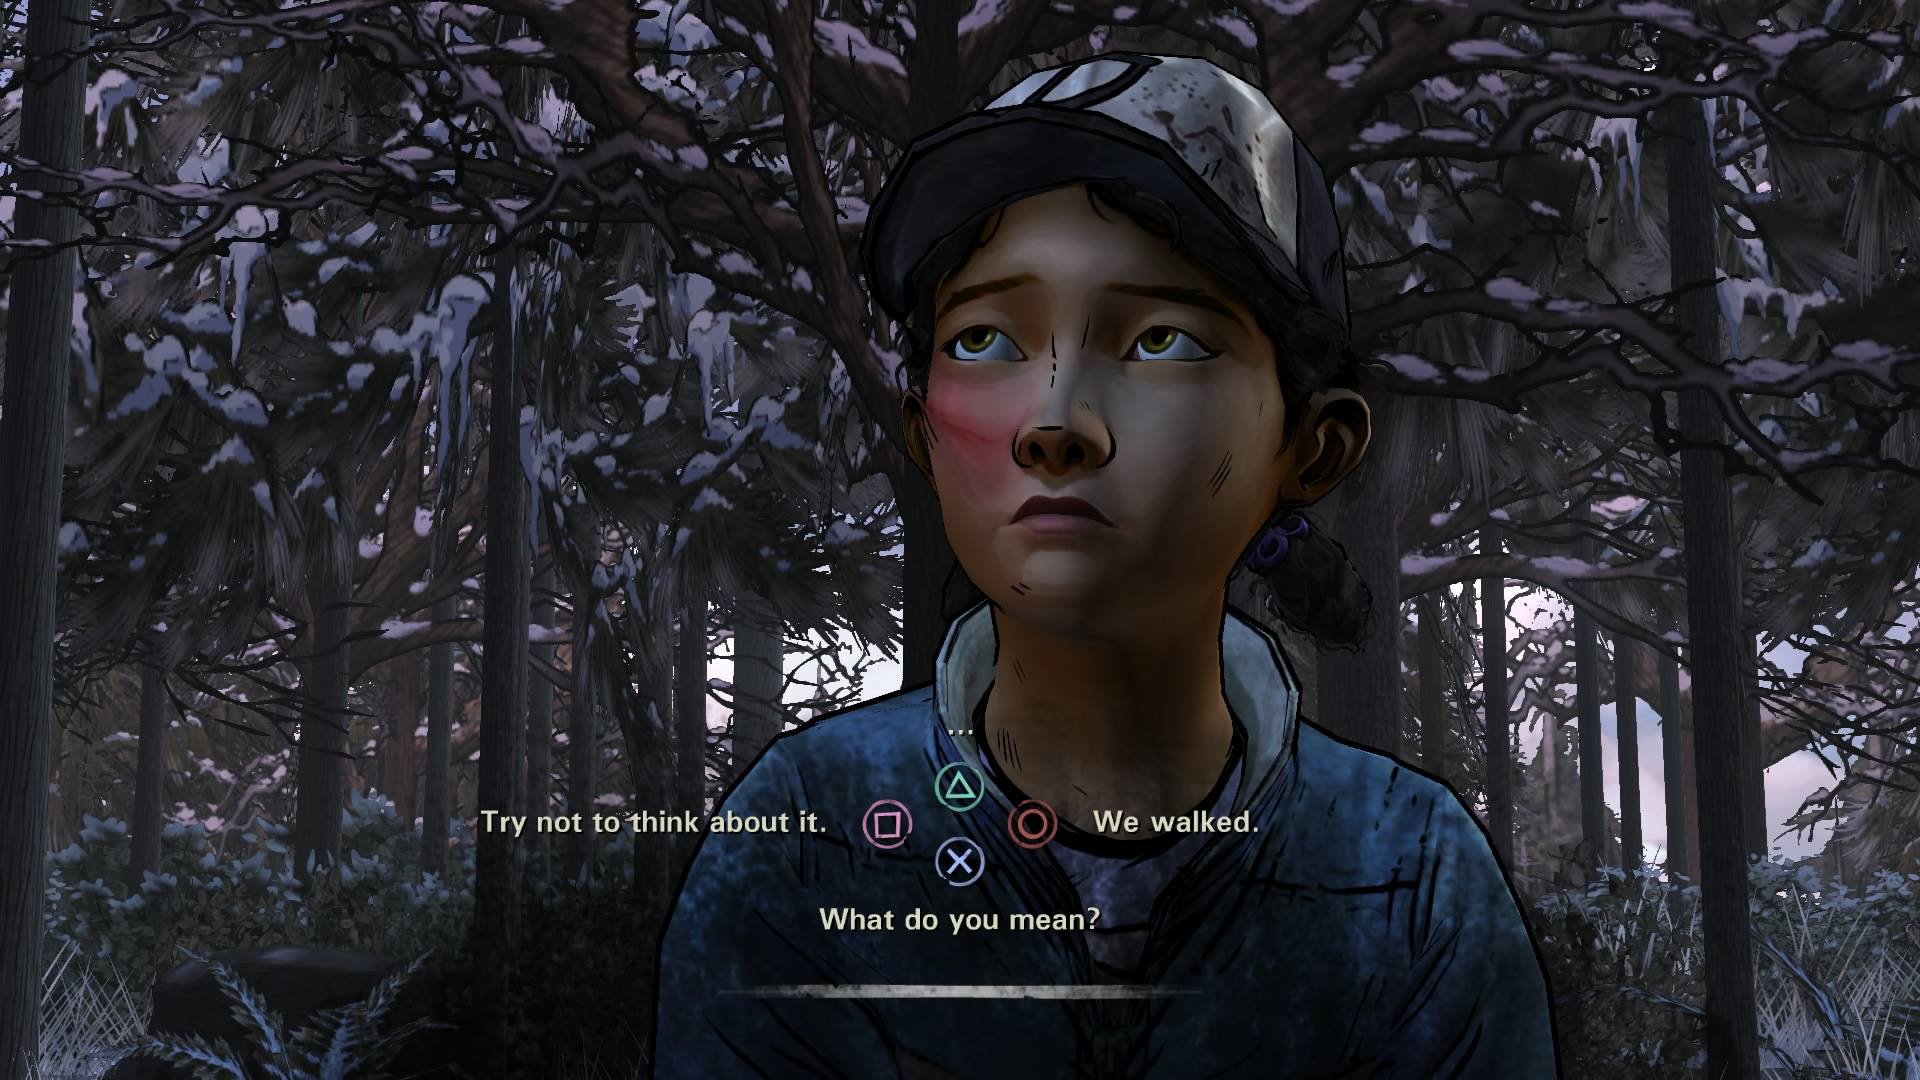 Clementine makes a dialog choice in 'The Walking Dead'